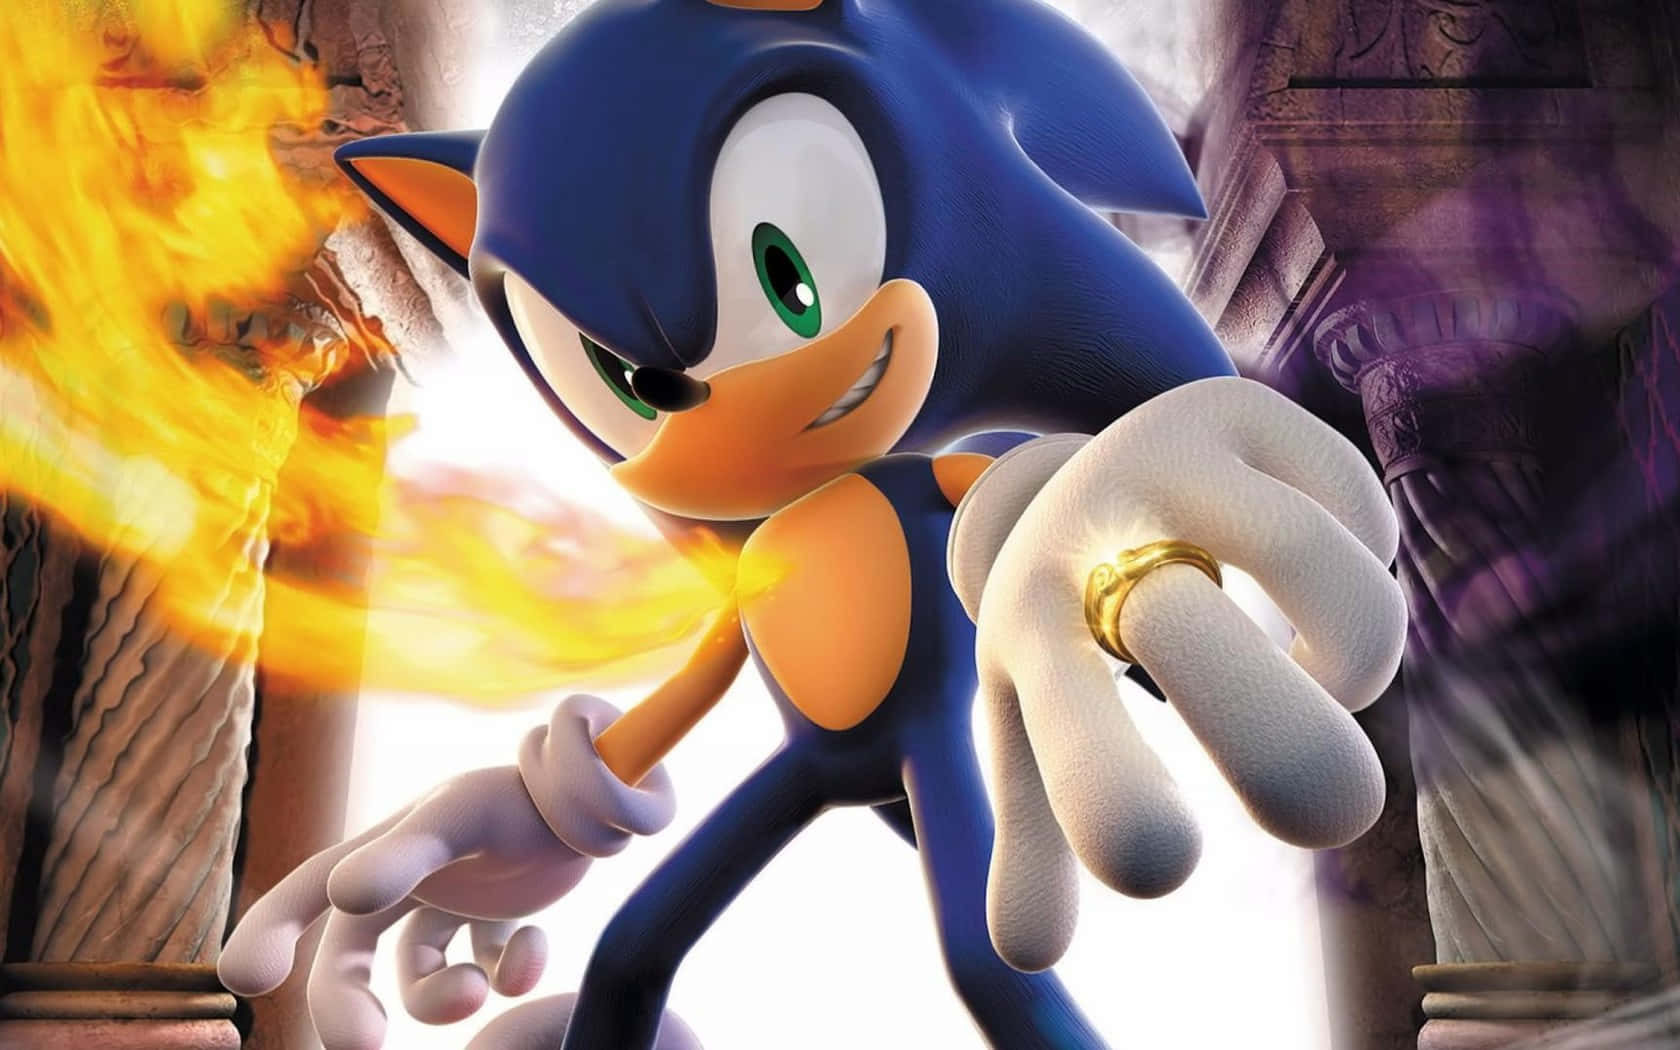 Sonic the Hedgehog revs up for an electrifying adventure.